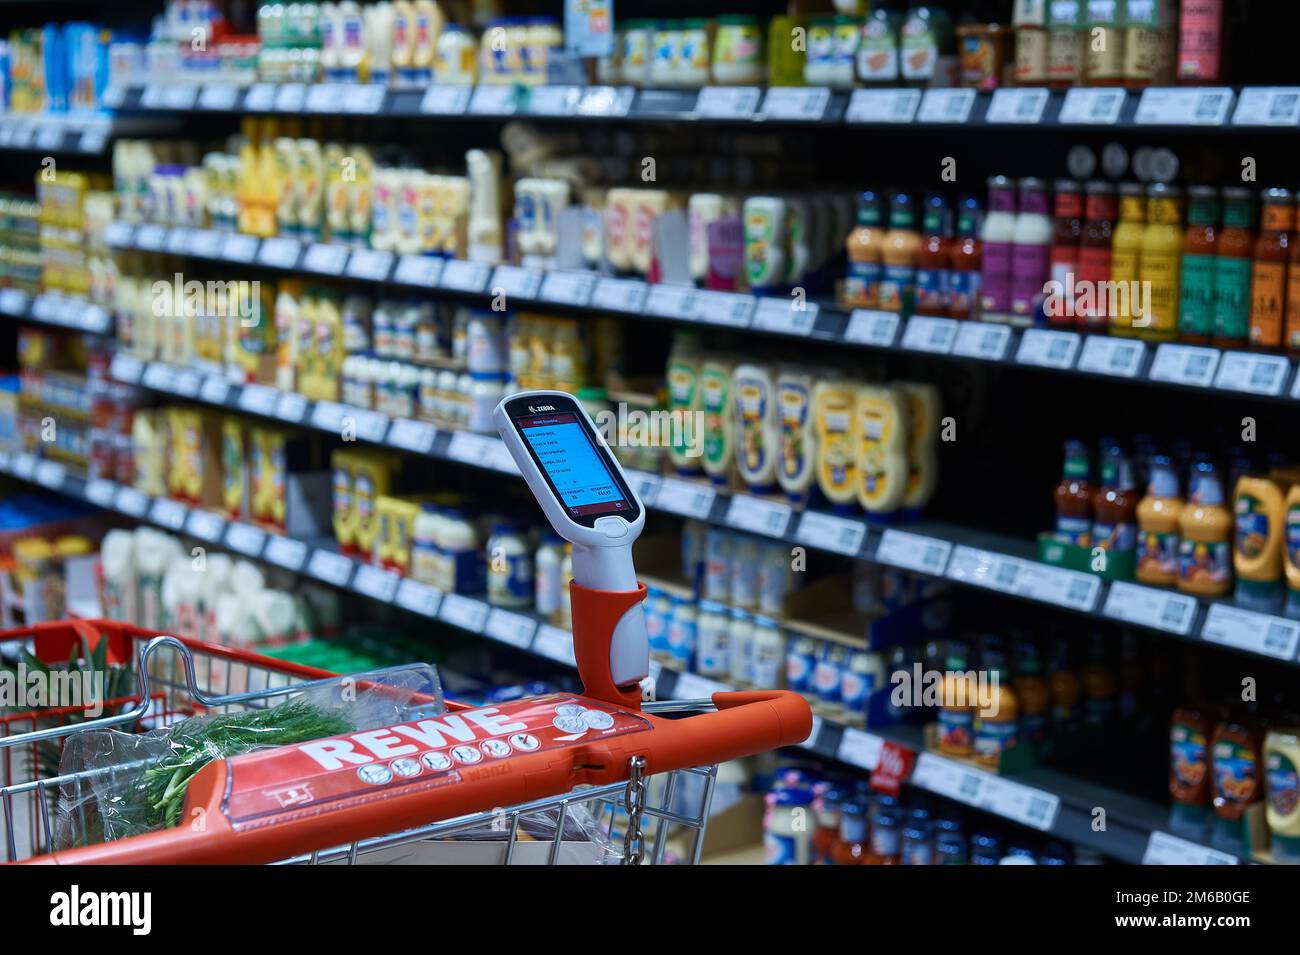 Scan and Go device for self-scanning in the holder on the shopping trolley, Rewe Center Tonndorfer main street 71-81, 22045 Hamburg, Germany Stock Photo